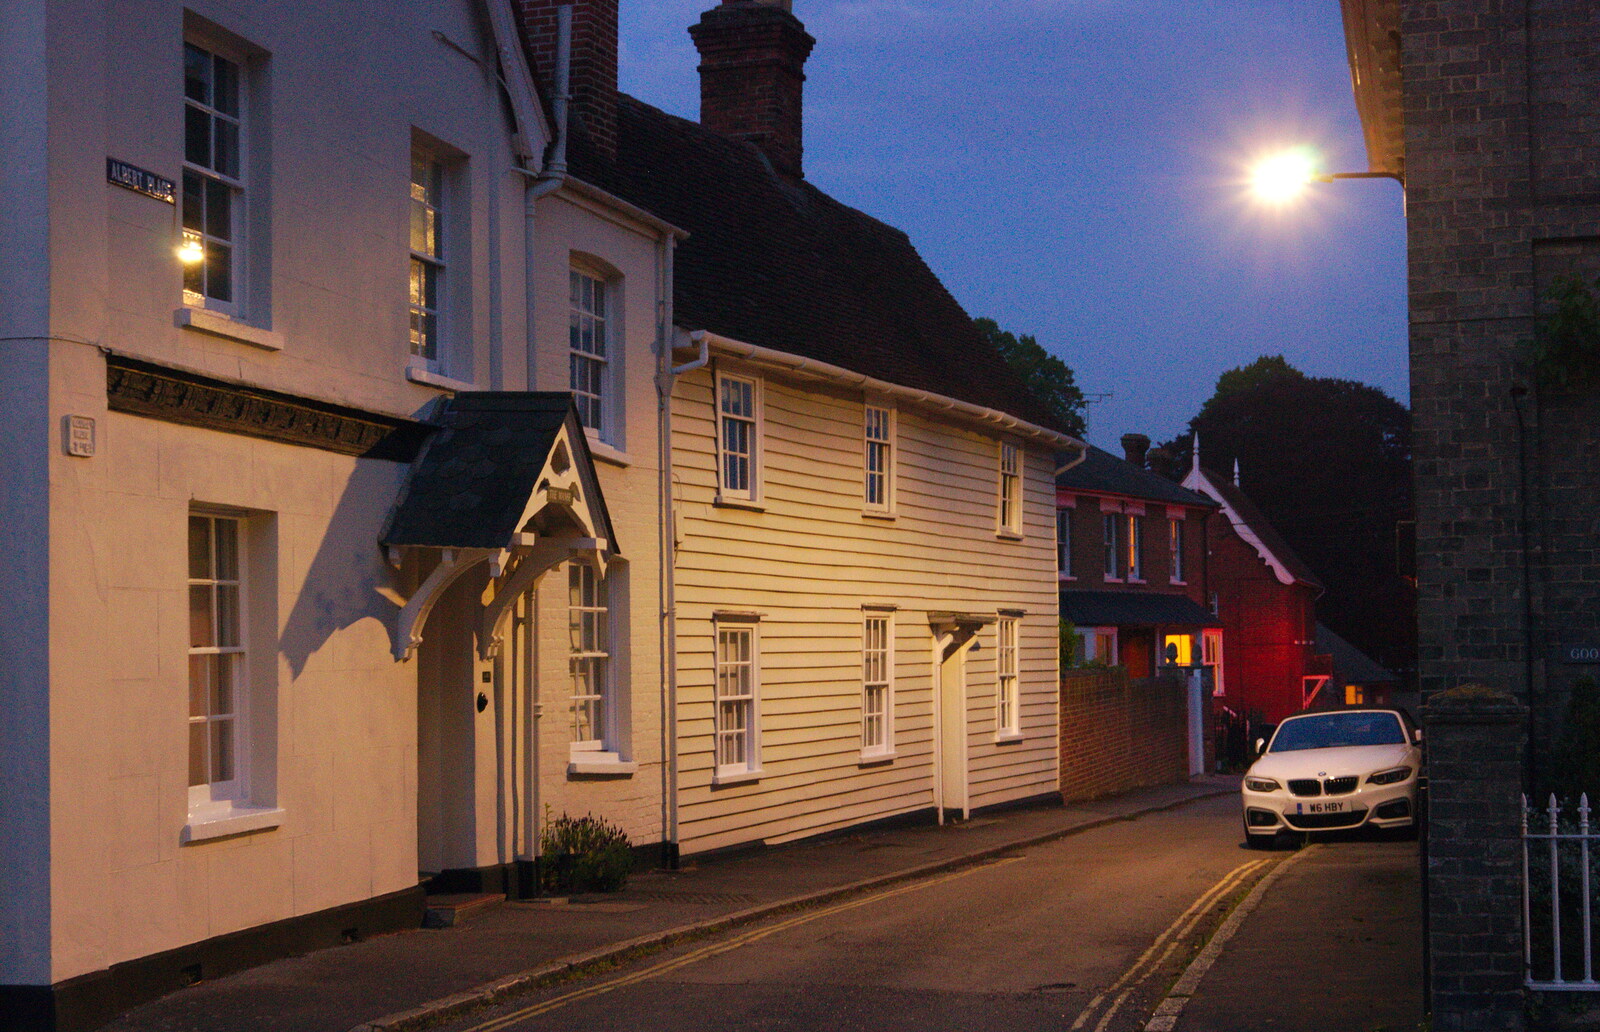 Albert Place in Coggeshall from The BSCC Bike Ride 2019, Coggeshall, Essex - 11th May 2019